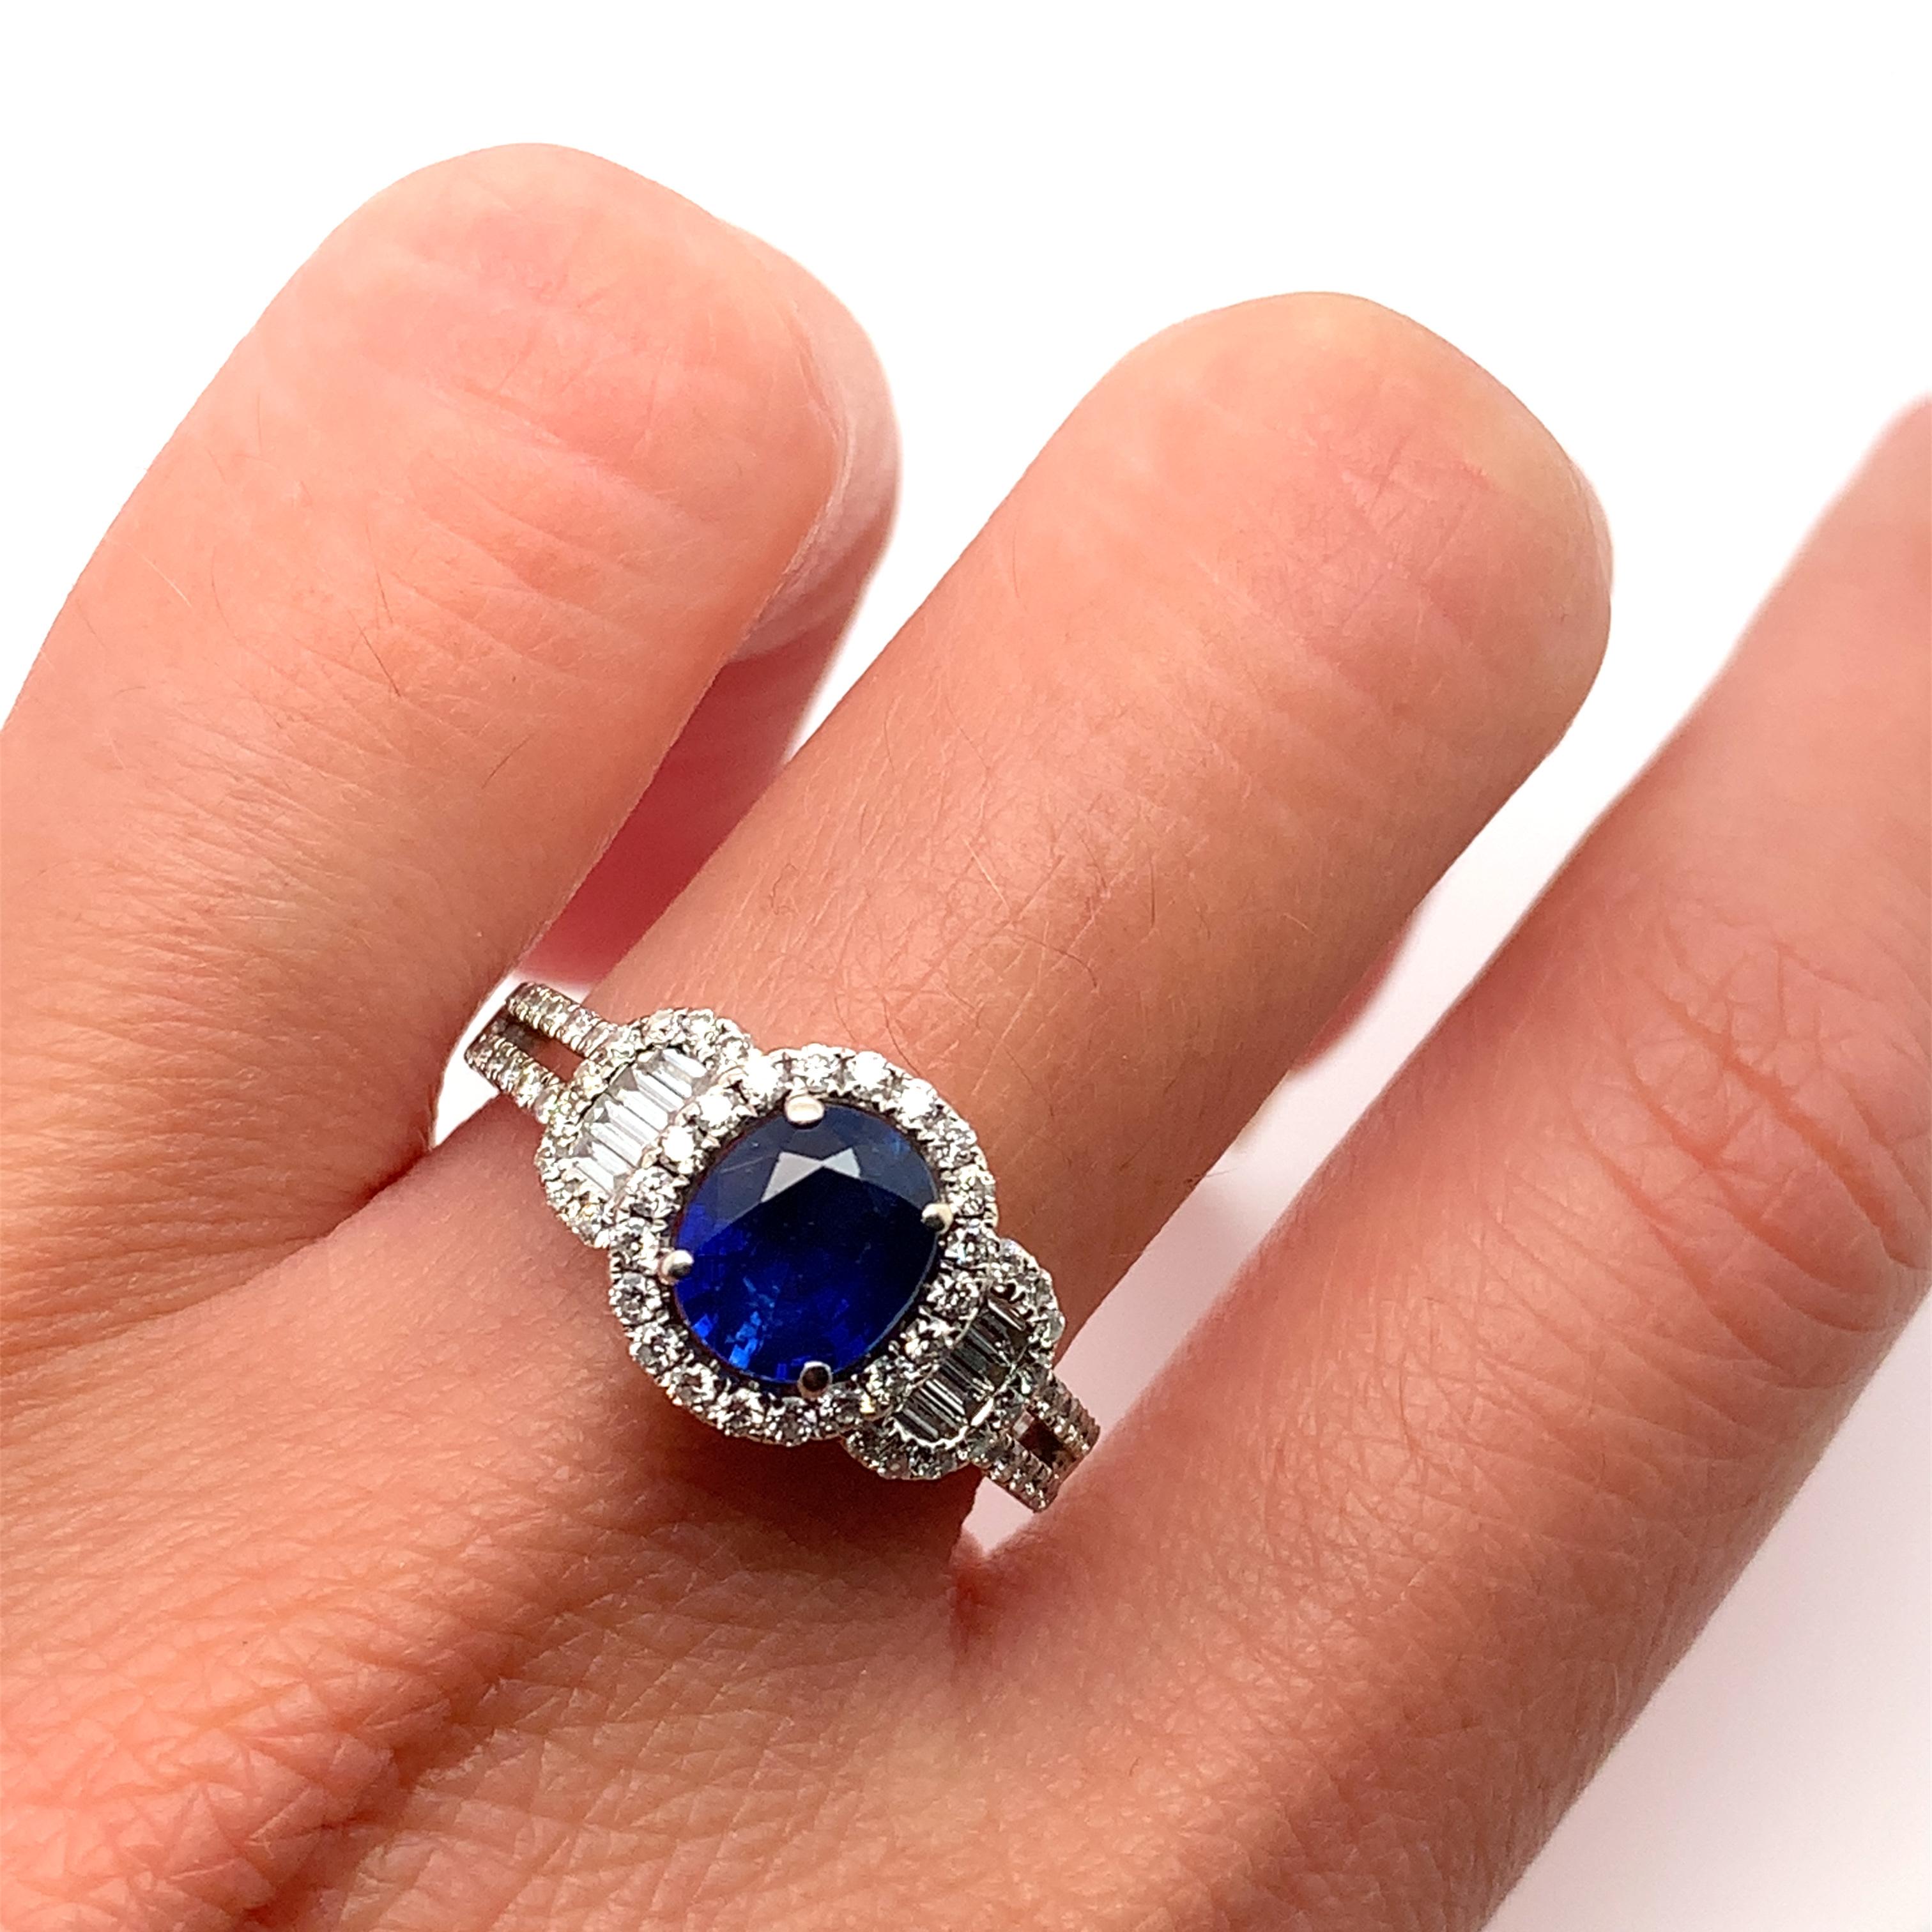 Oval shaped sapphire blue vivid colour total weight 1.27ct 
Art deco style sapphire and baguette diamonds halo engagement ring in 18k white gold.
Round brilliant cut diamond total weigh 1.30ct F colour VS1 clarity
Hallmarked
Size M1/2
The ring can